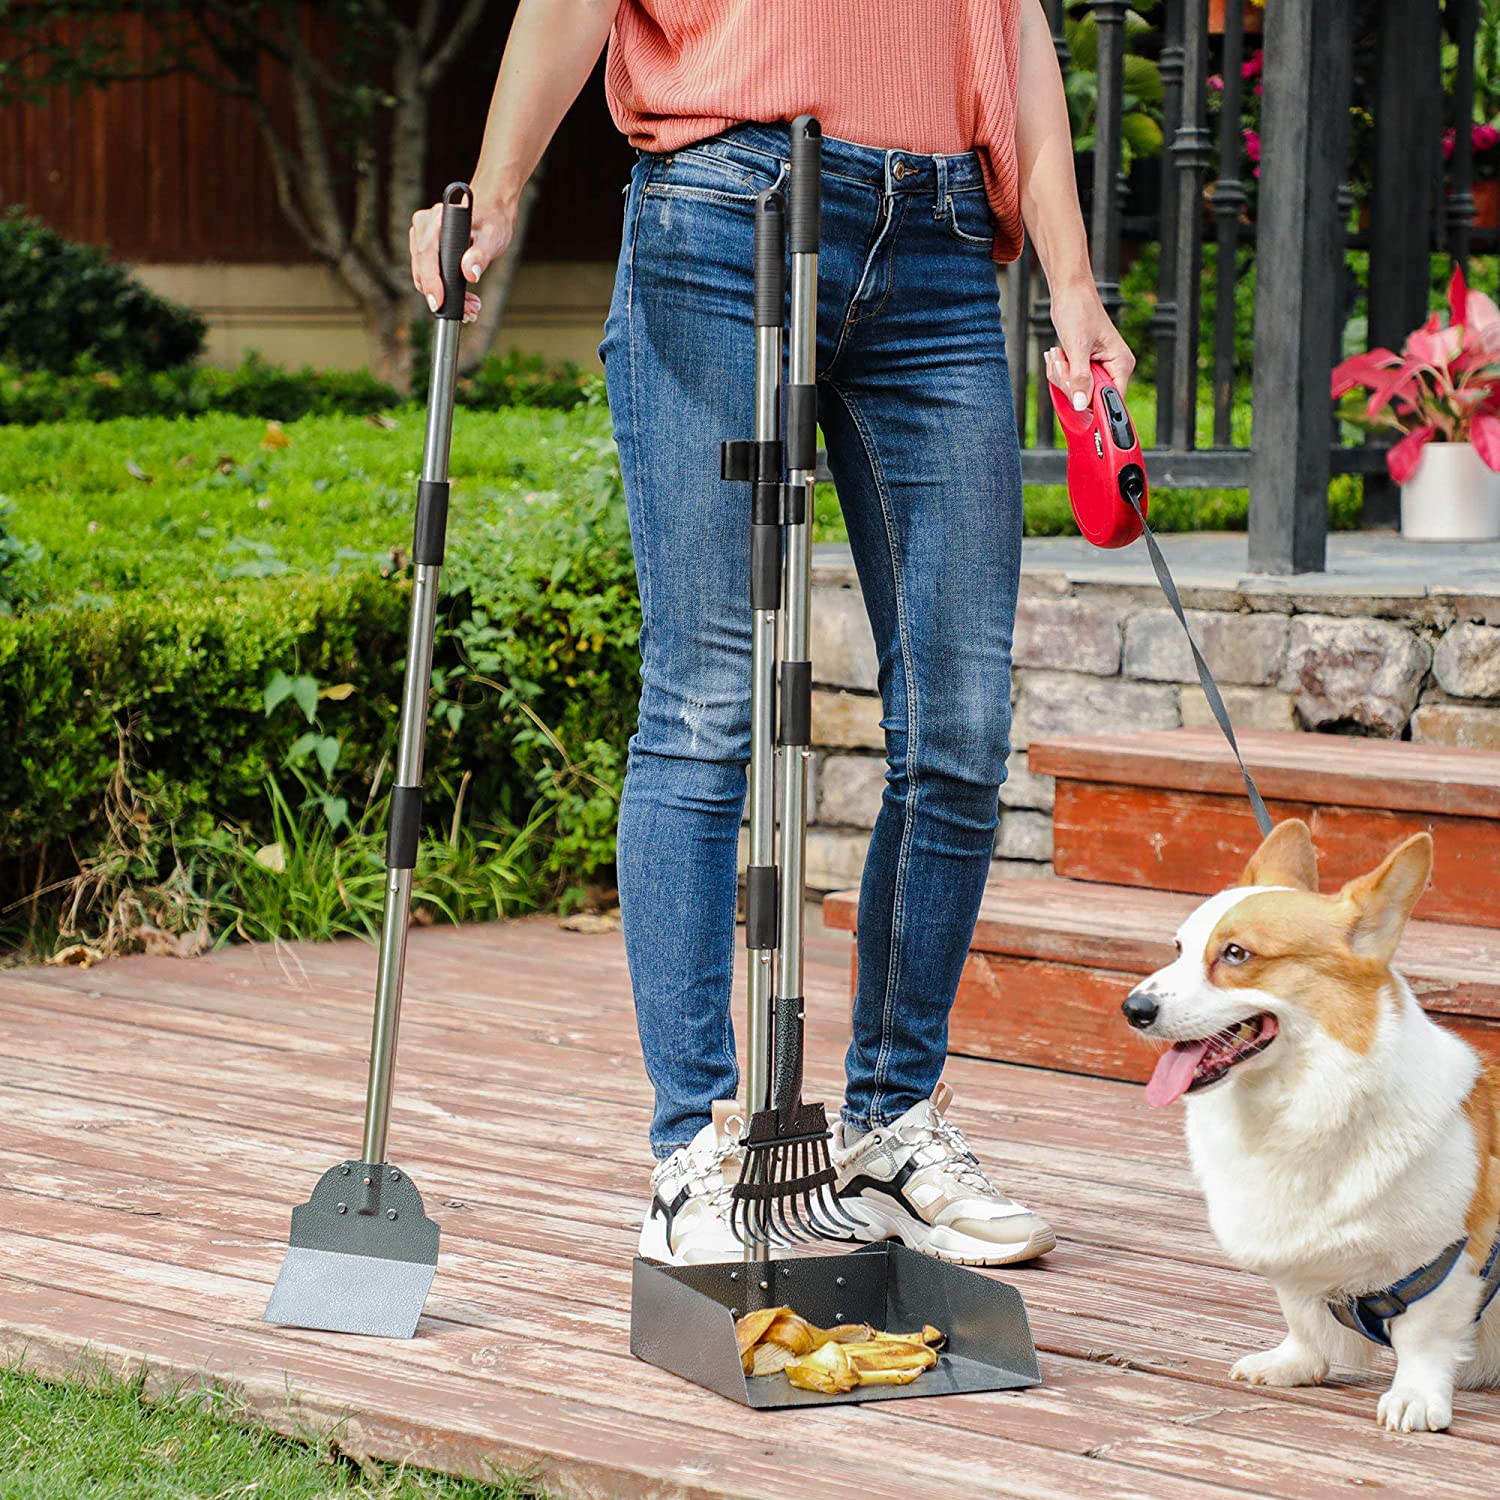 FEANDREA Big Pooper Scooper, for Large, Small Dogs, 3-Piece Rake Tray and Spade Set, Easy to Clean, Adjustable Long Handle, Steel, for Pets Lawn Grass Dirt Gravel, Black and Silver UPPP102B01 Animals & Pet Supplies > Pet Supplies > Dog Supplies > Dog Kennels & Runs FEANDREA   